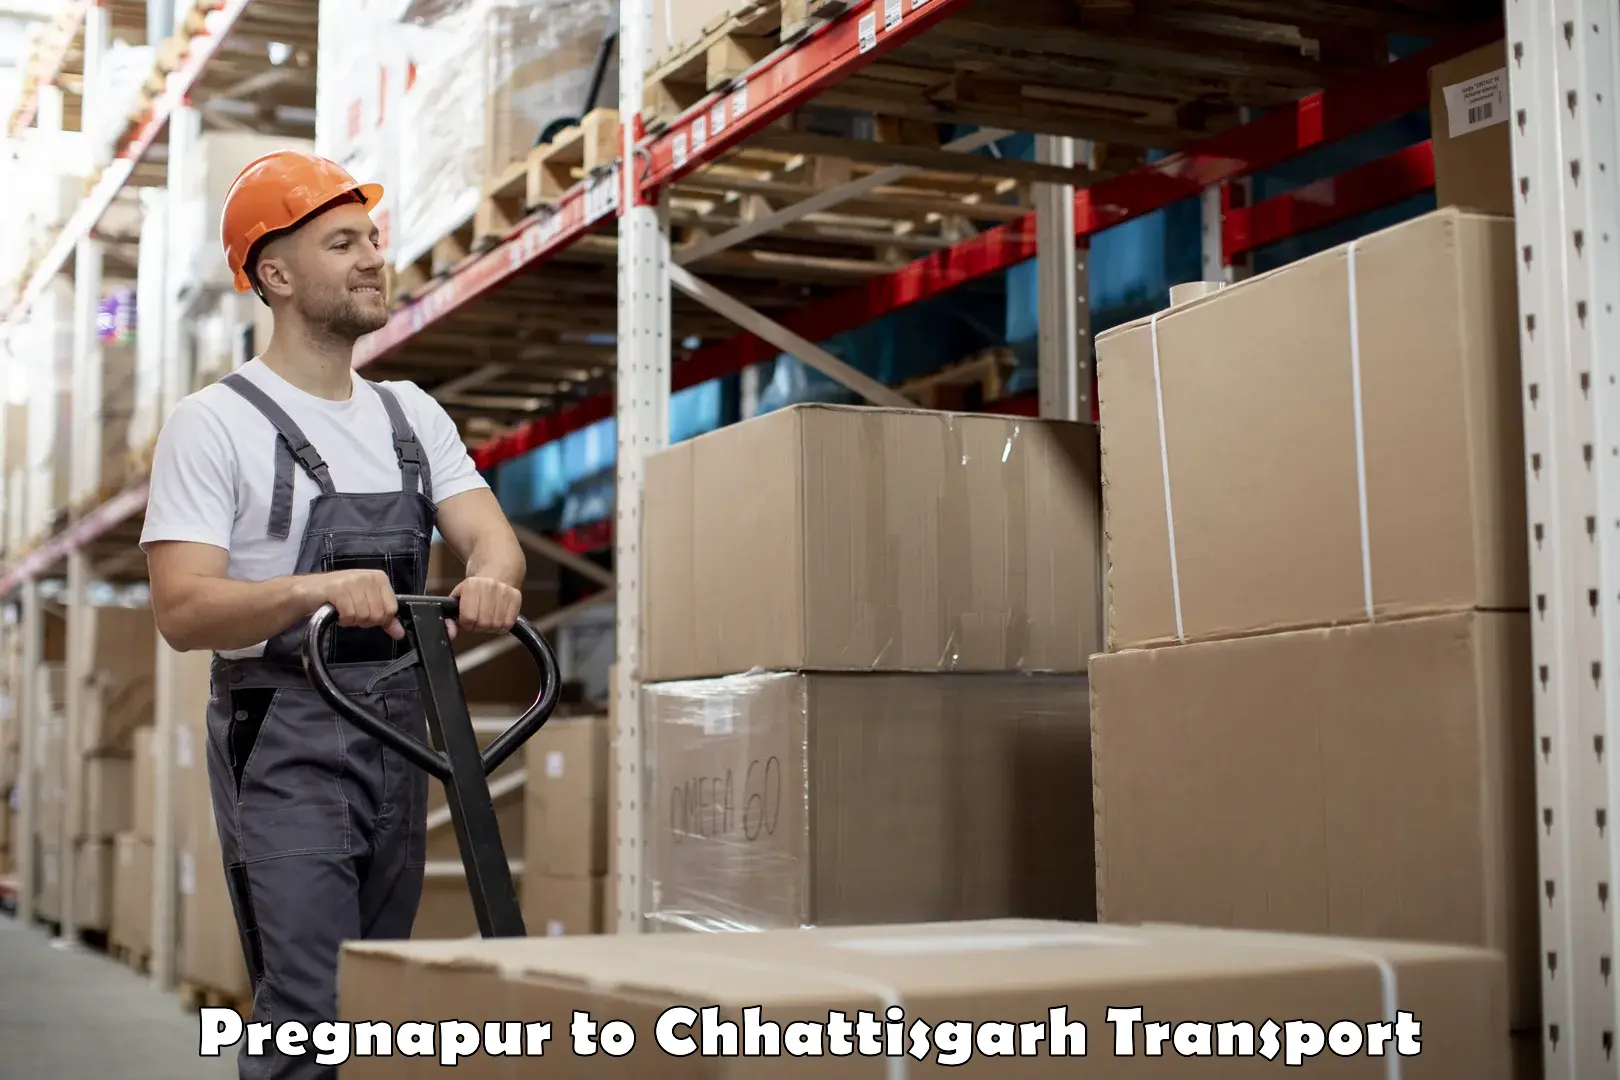 Truck transport companies in India Pregnapur to Amakhokhara